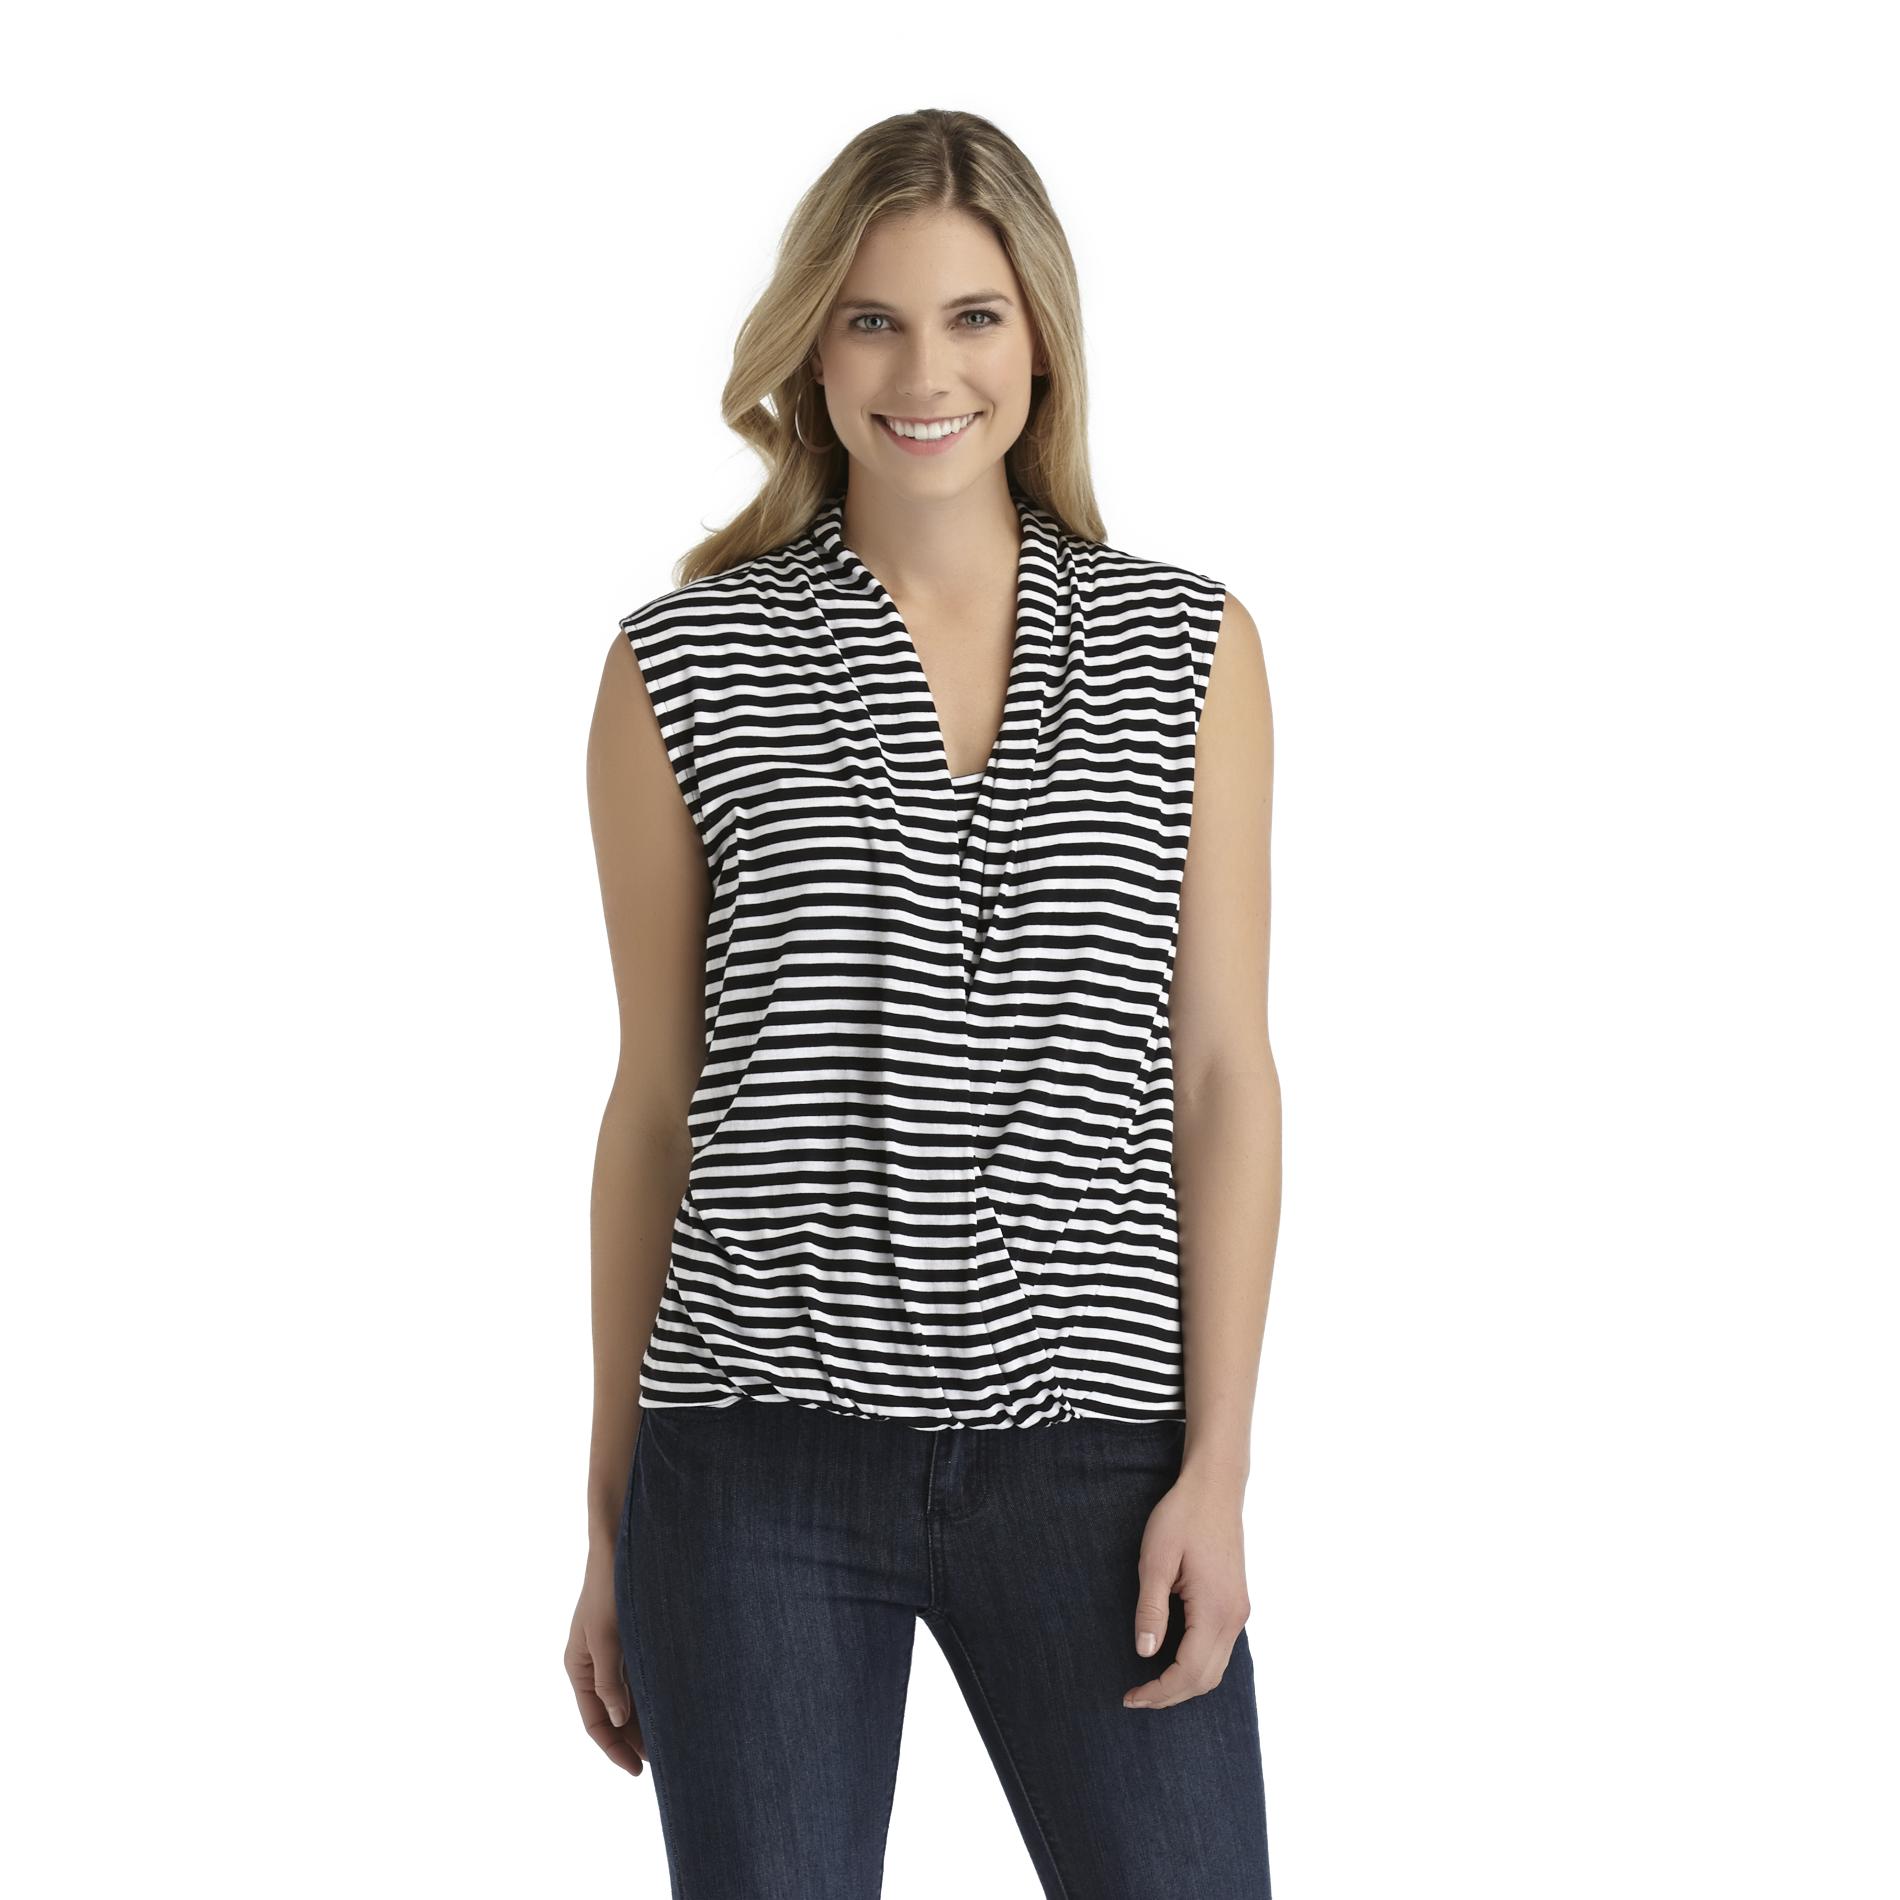 Attention Women's Layered Wrap Top - Striped